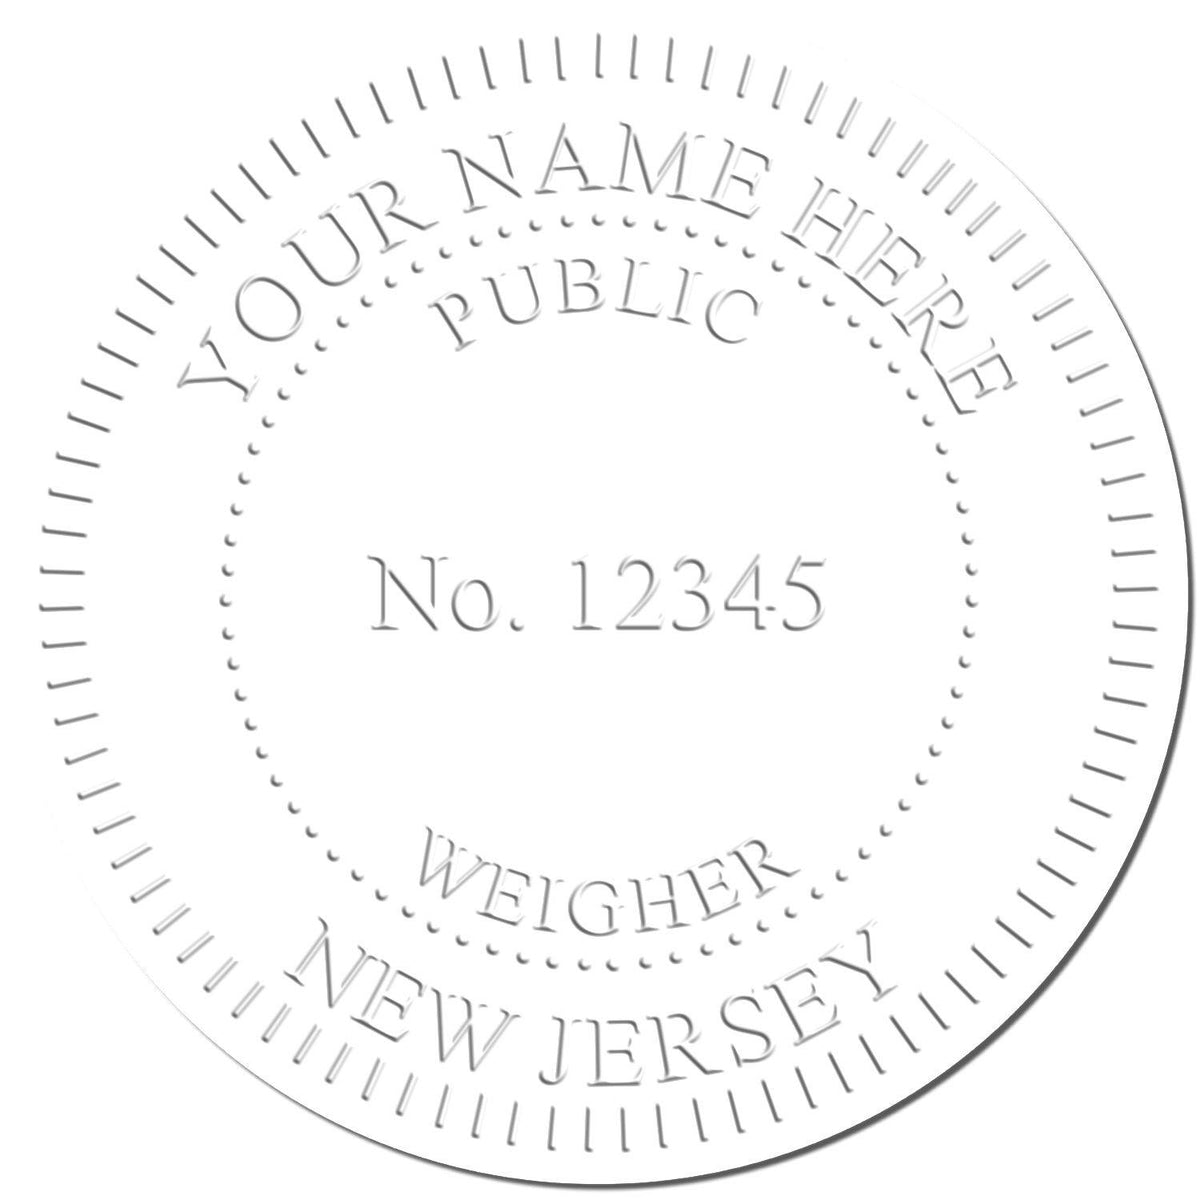 Public Weighmaster Pink Gift Embosser - Engineer Seal Stamps - Embosser Type_Desk, Embosser Type_Gift, Type of Use_Professional